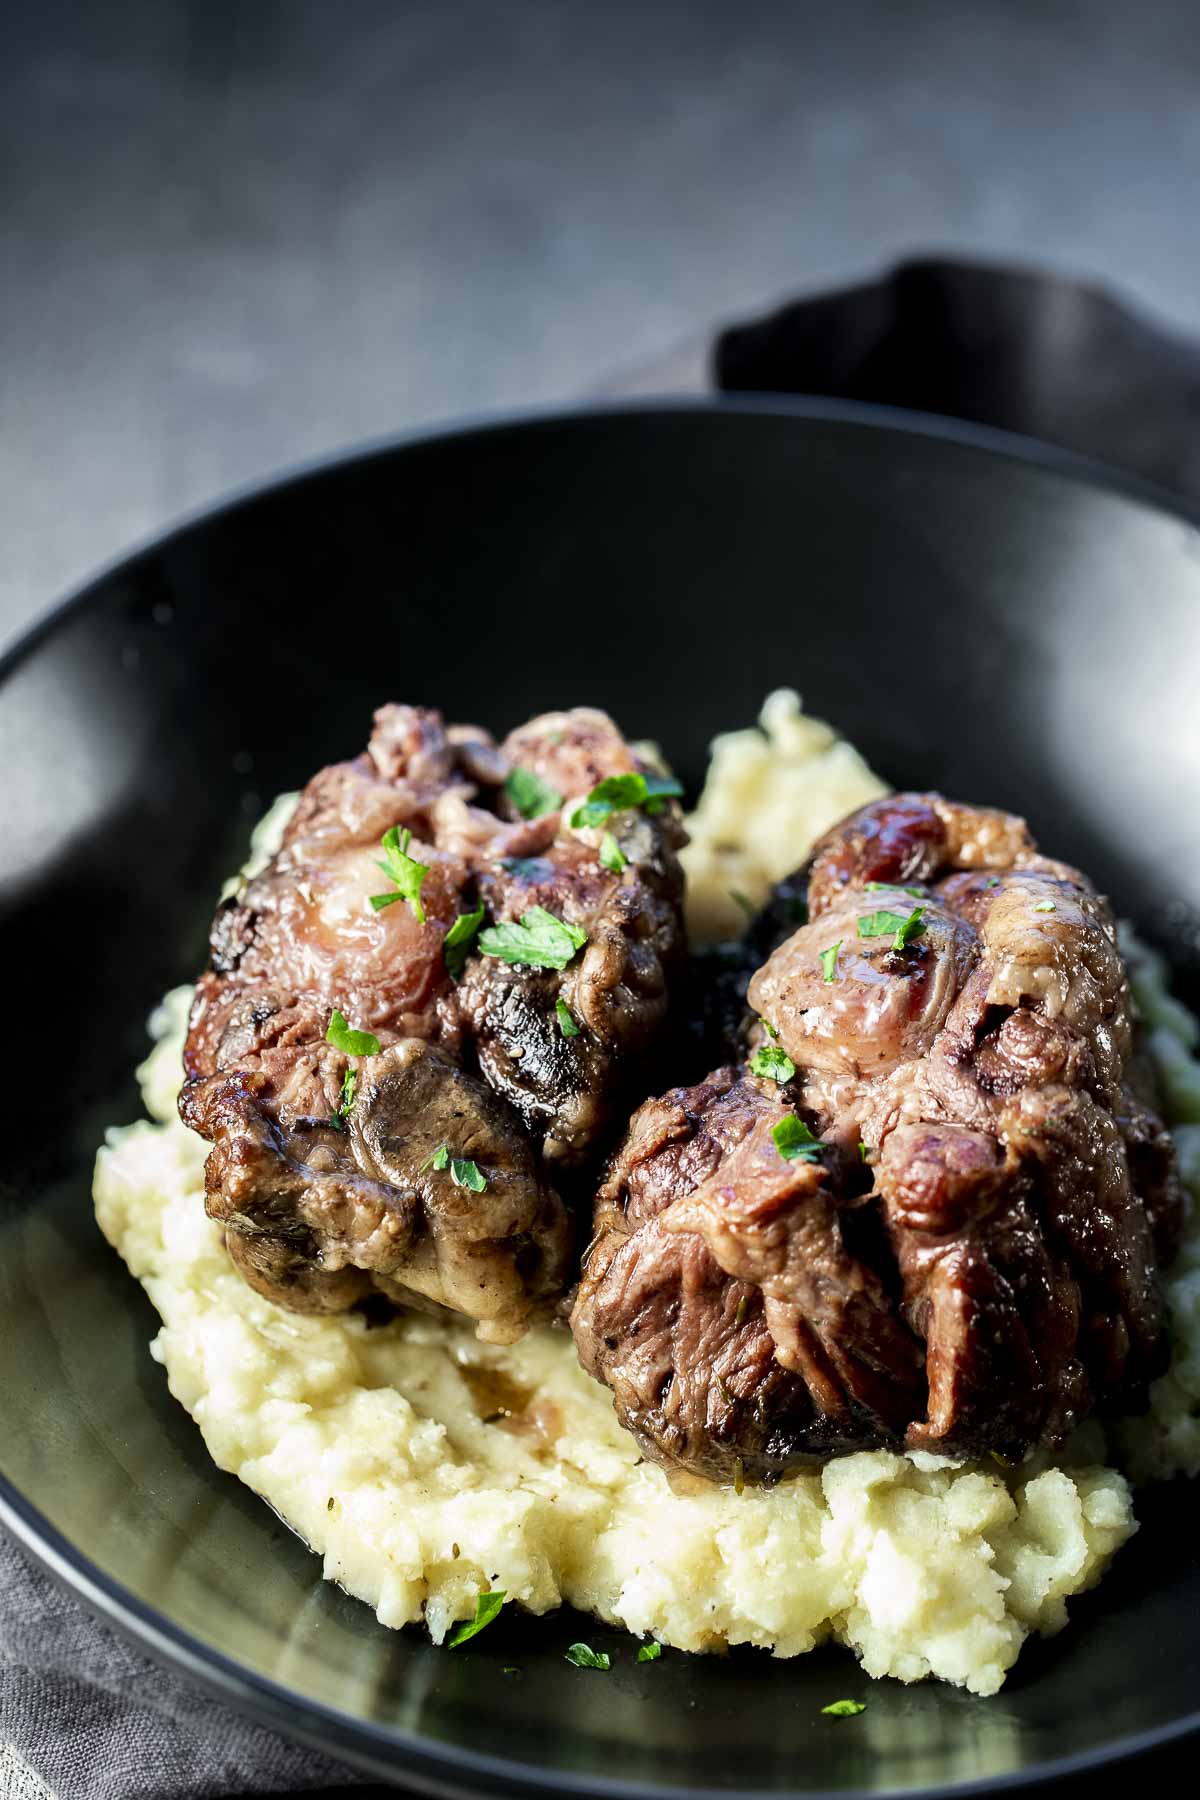 Side view of two pieces of oxtail served on top of mashed potatoes.